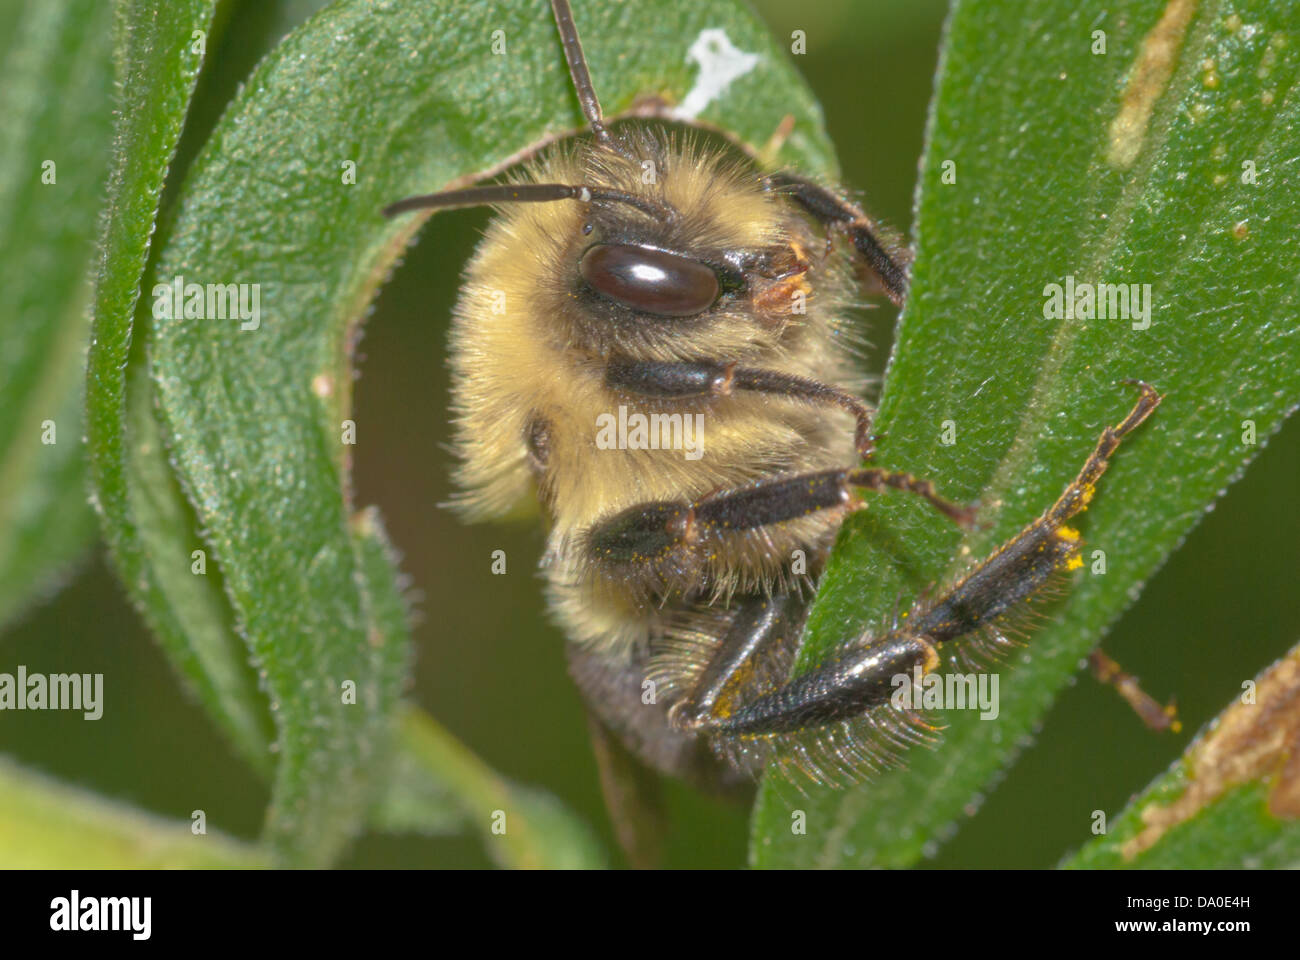 Mining bee (Andrena spp) clinging to plant leaf, Little Cataraqui Conservation Area, Ontario Stock Photo